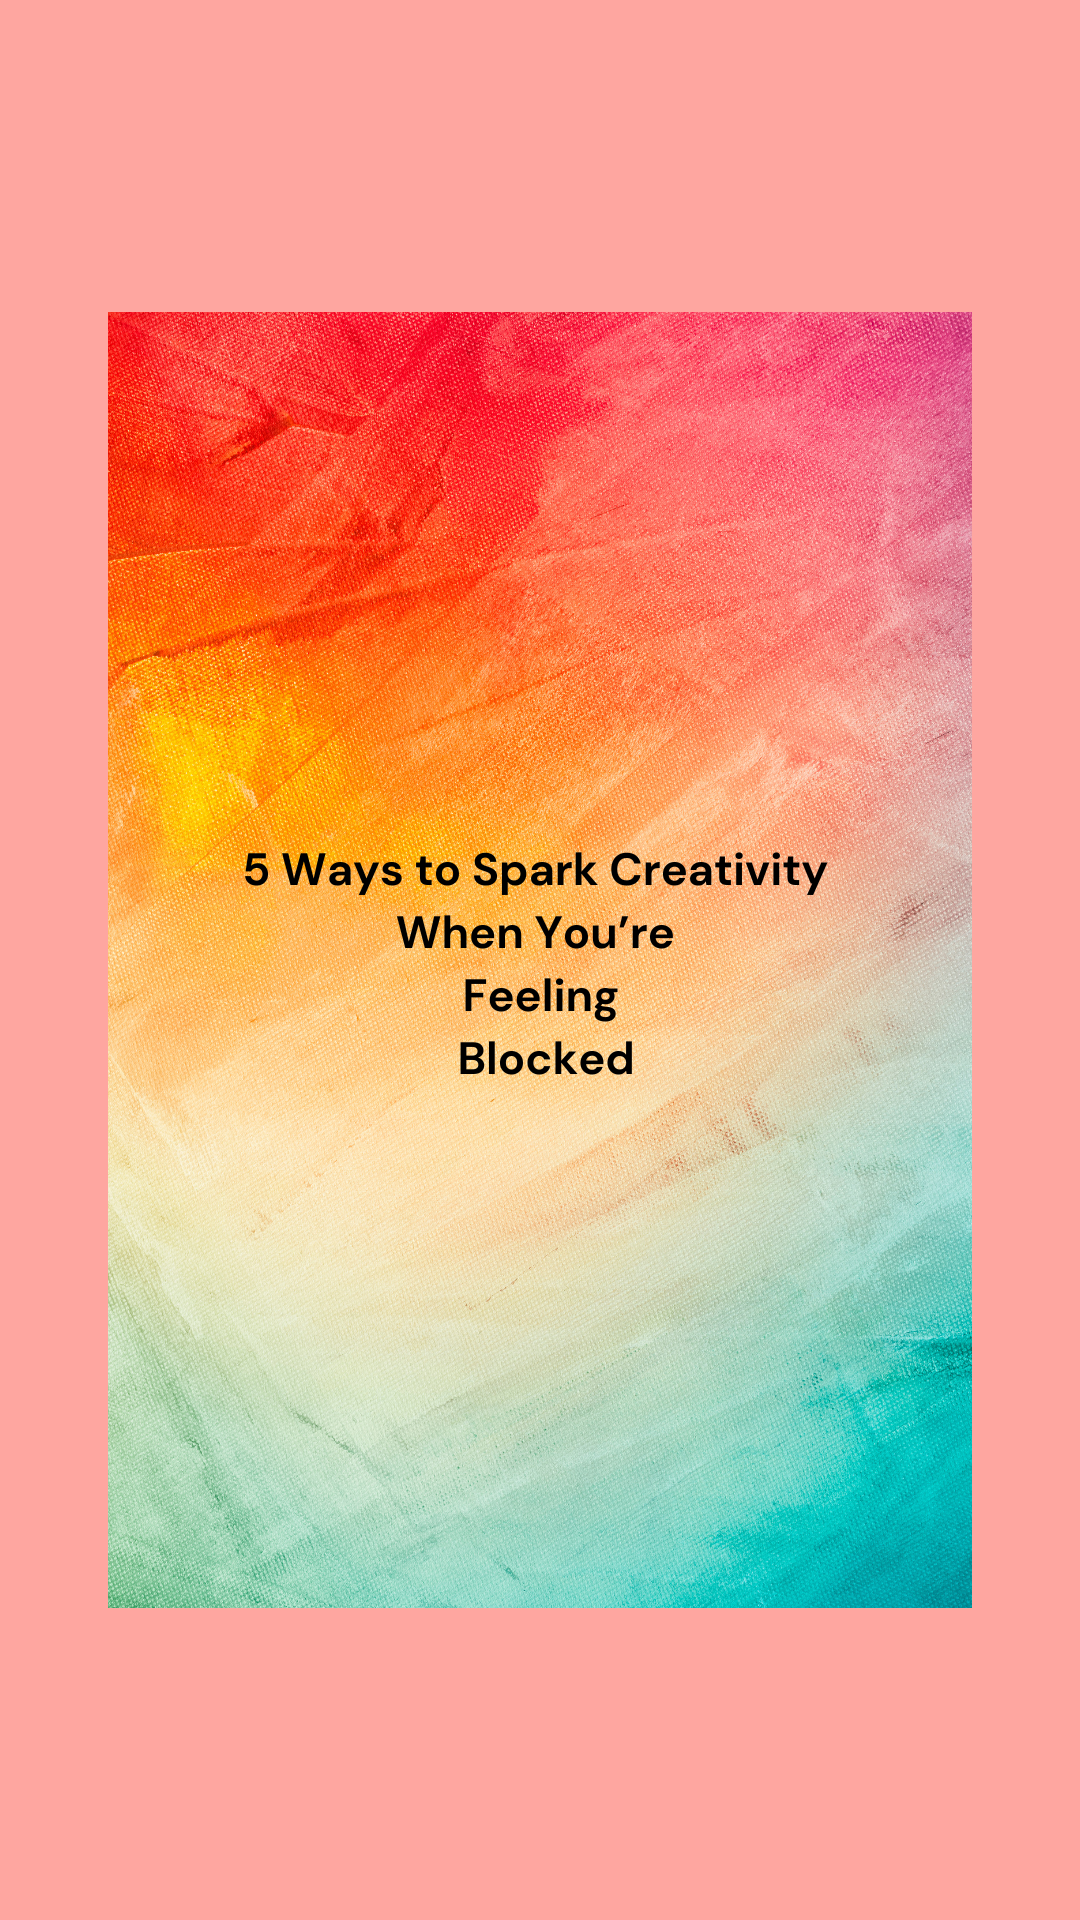 5 Ways to Spark Creativity When You’re Feeling Blocked